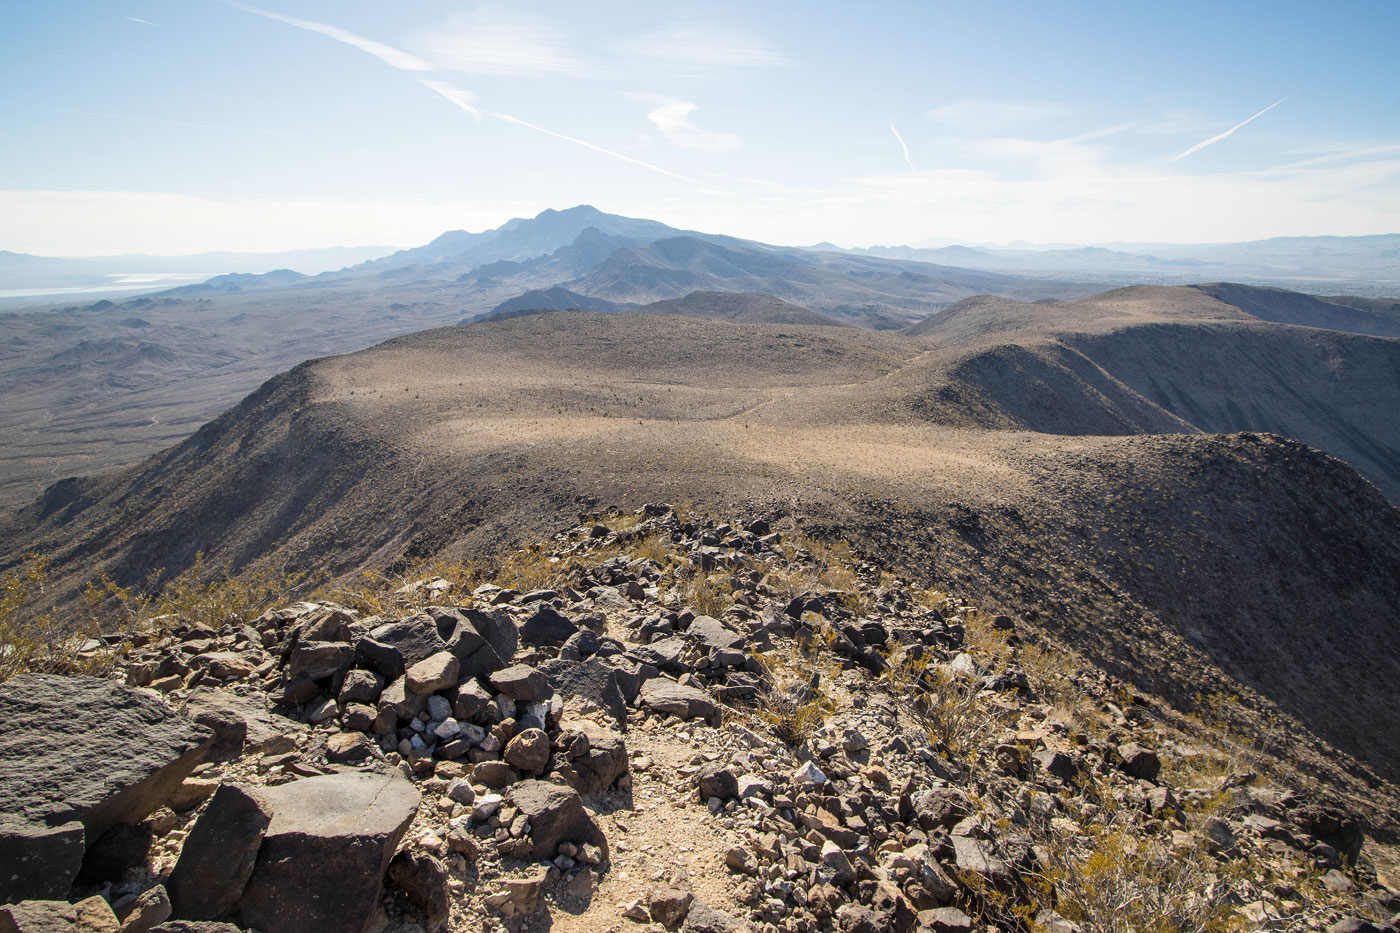 Hike Tortoise Shell Peak in Sloan Canyon National Conservation Area, Nevada - Stav is Lost